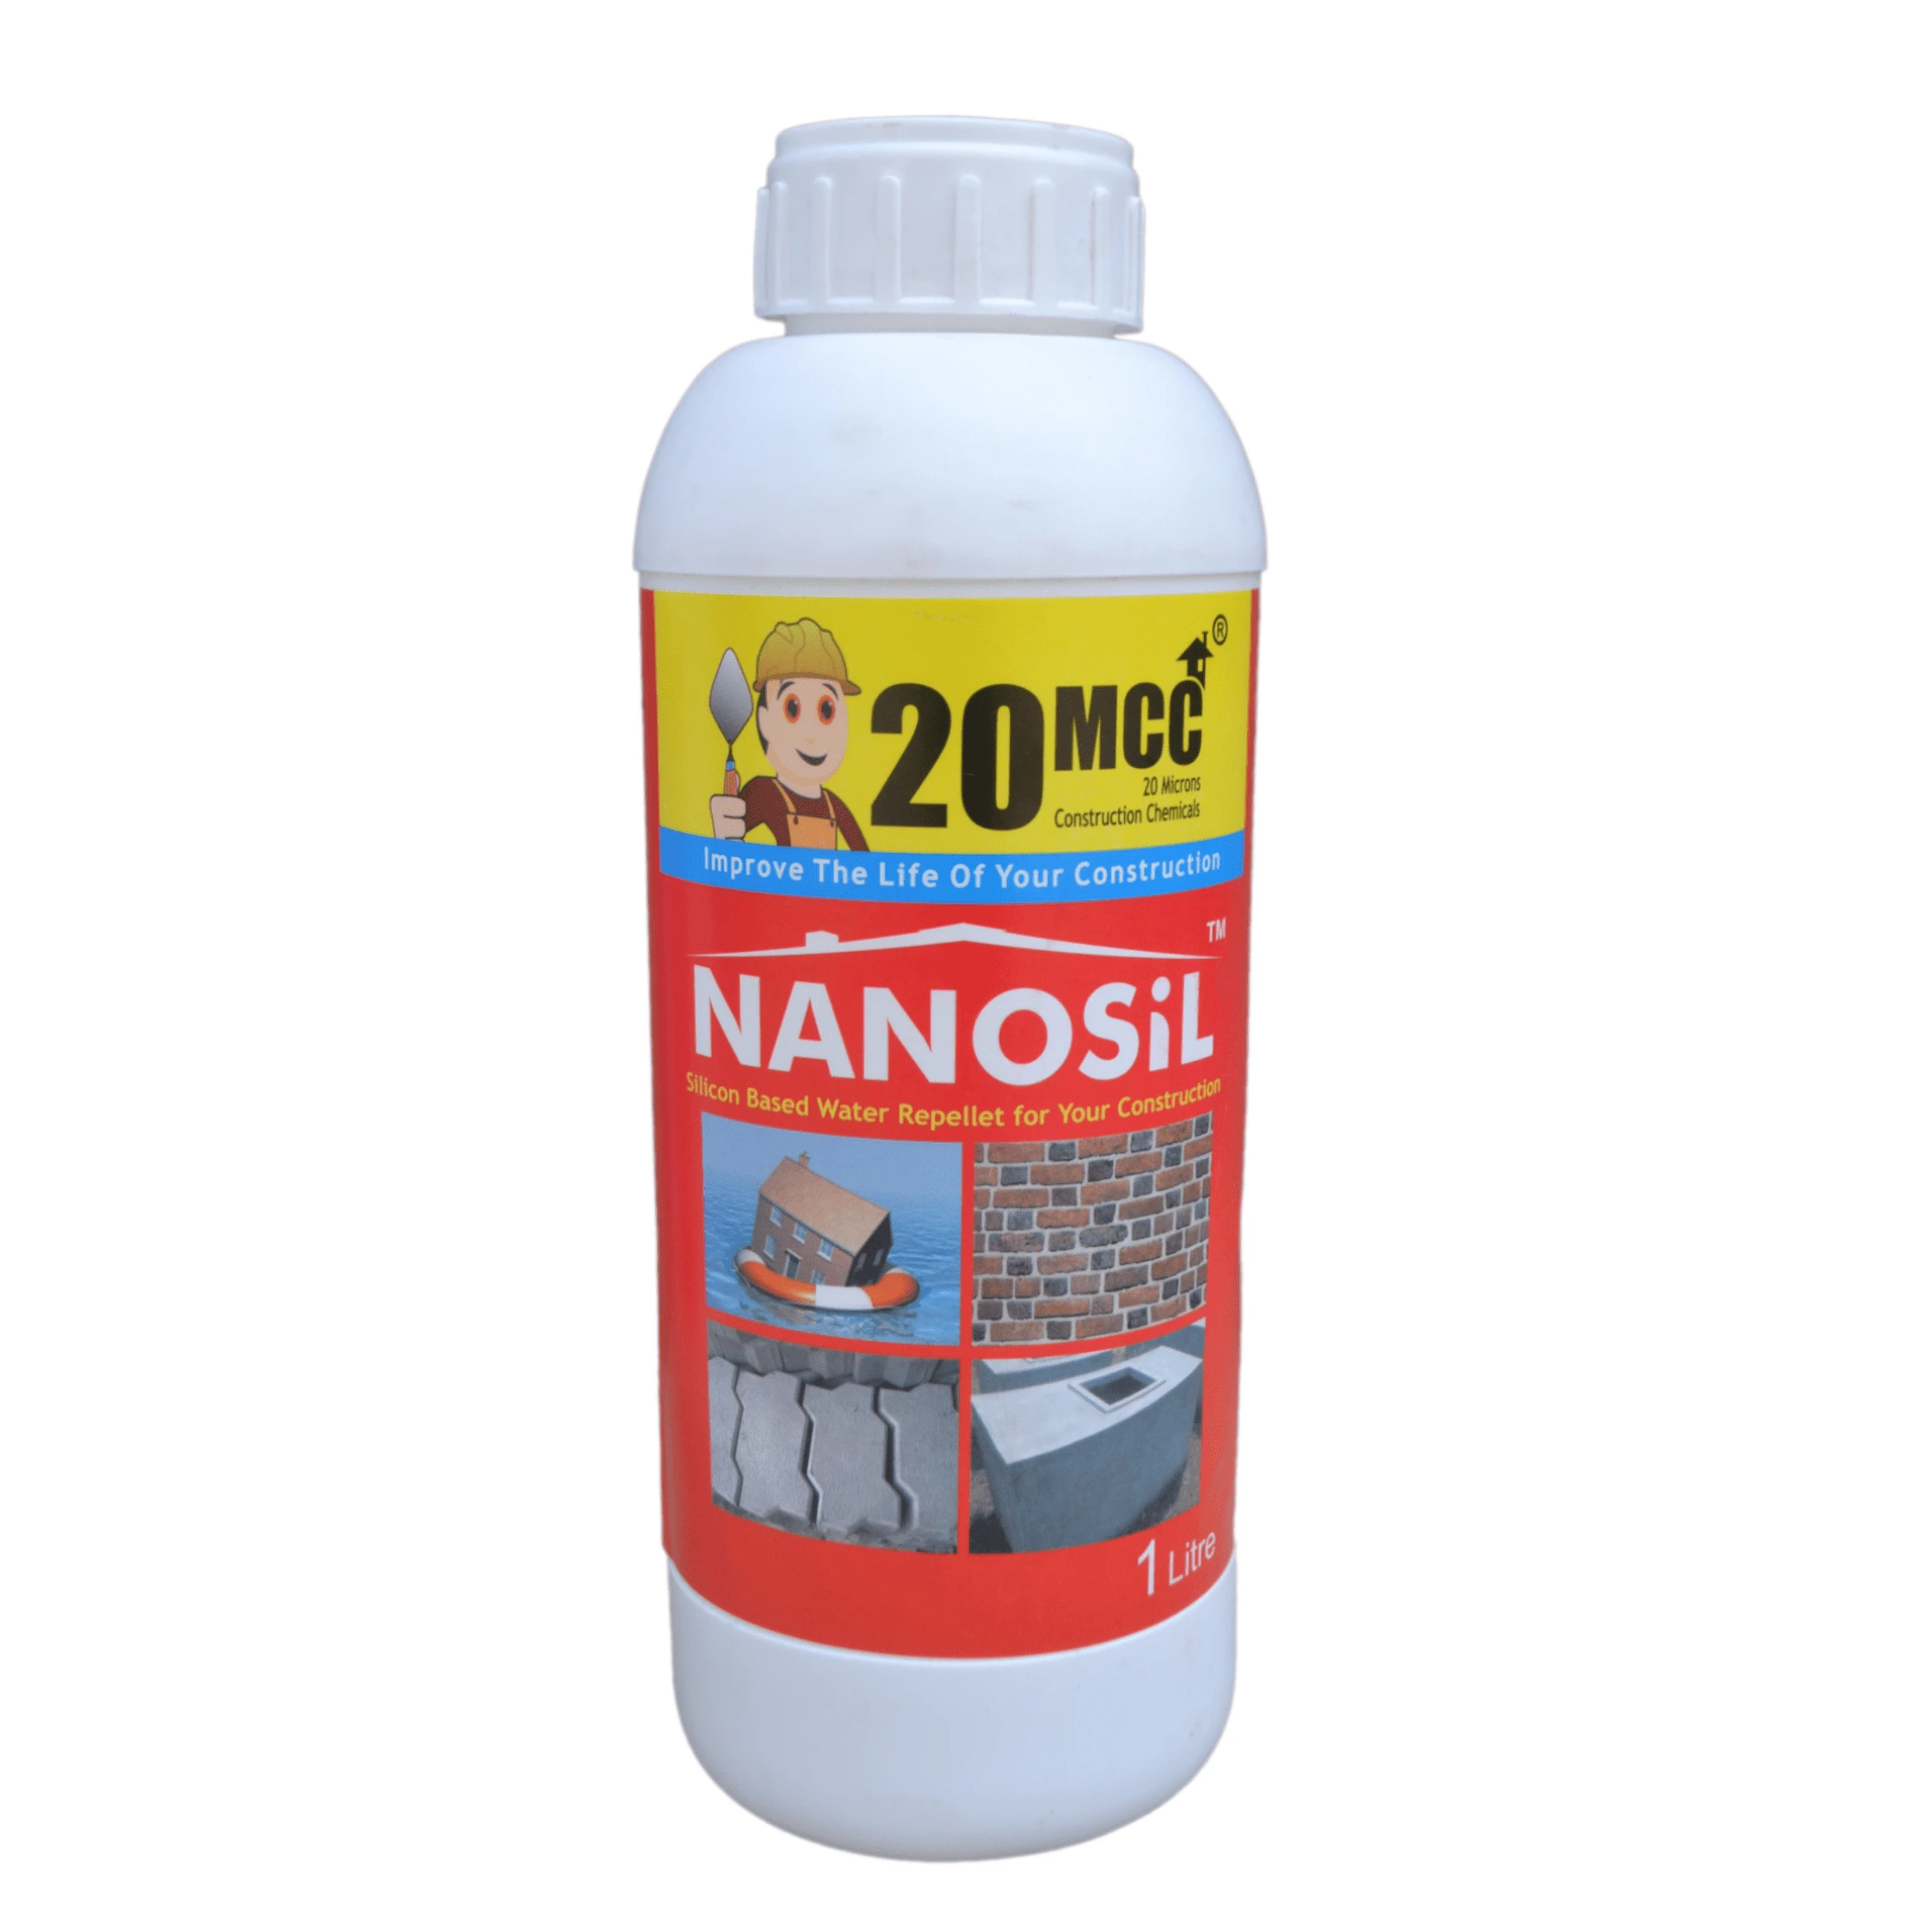 Nanosil - Water Repellent Solution For Your Construction